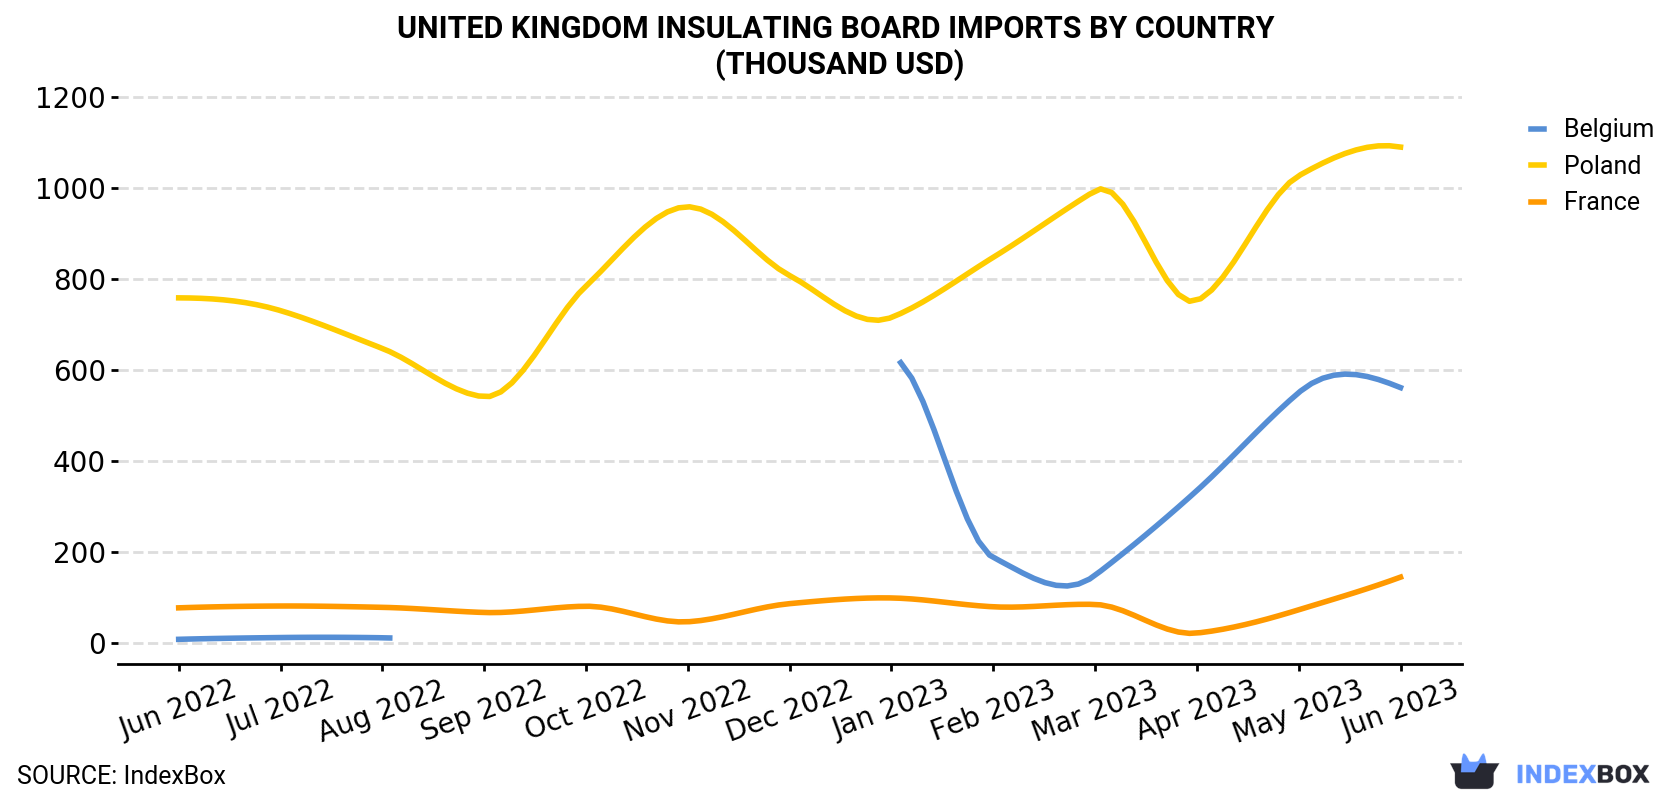 United Kingdom Insulating Board Imports By Country (Thousand USD)